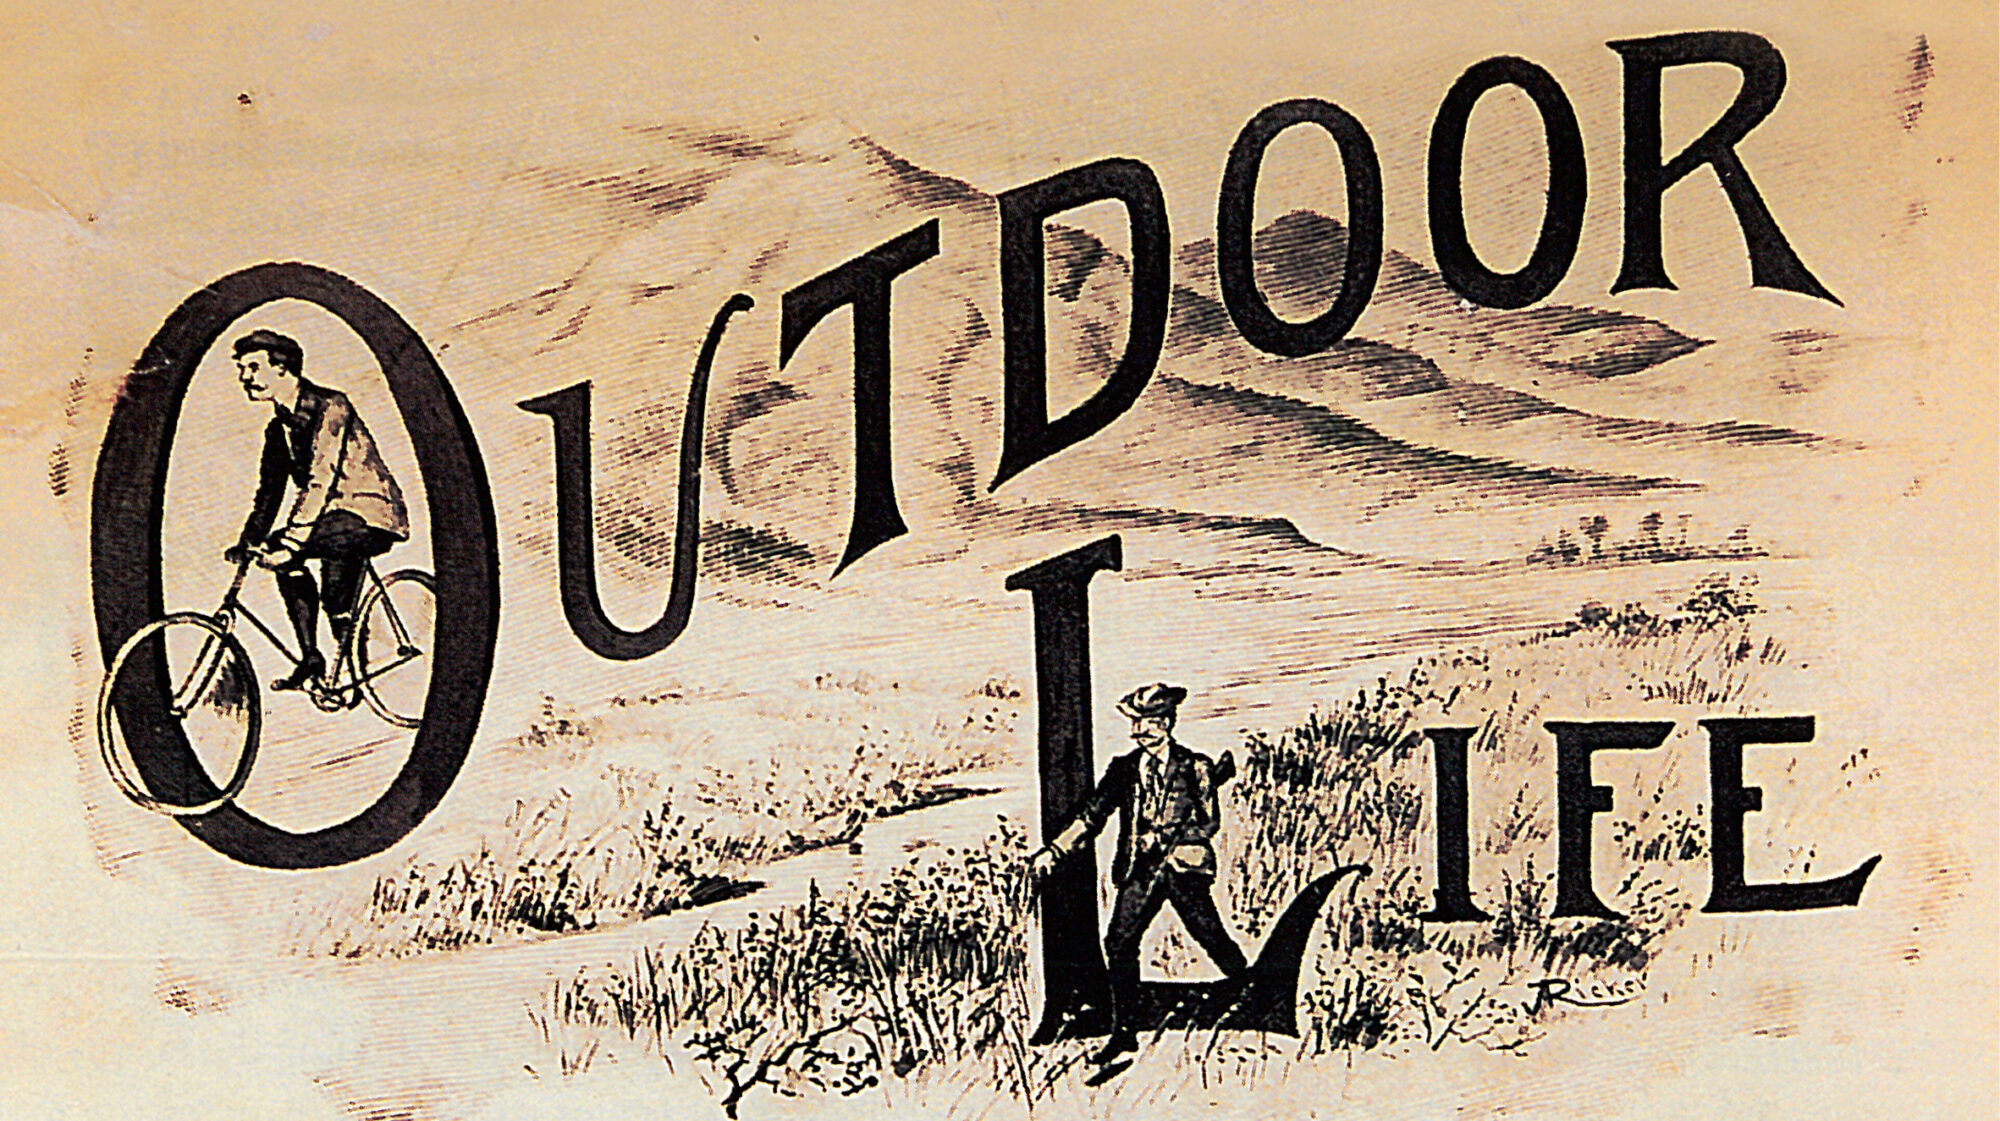 The cover art on the January 1898 issue of Outdoor Life.